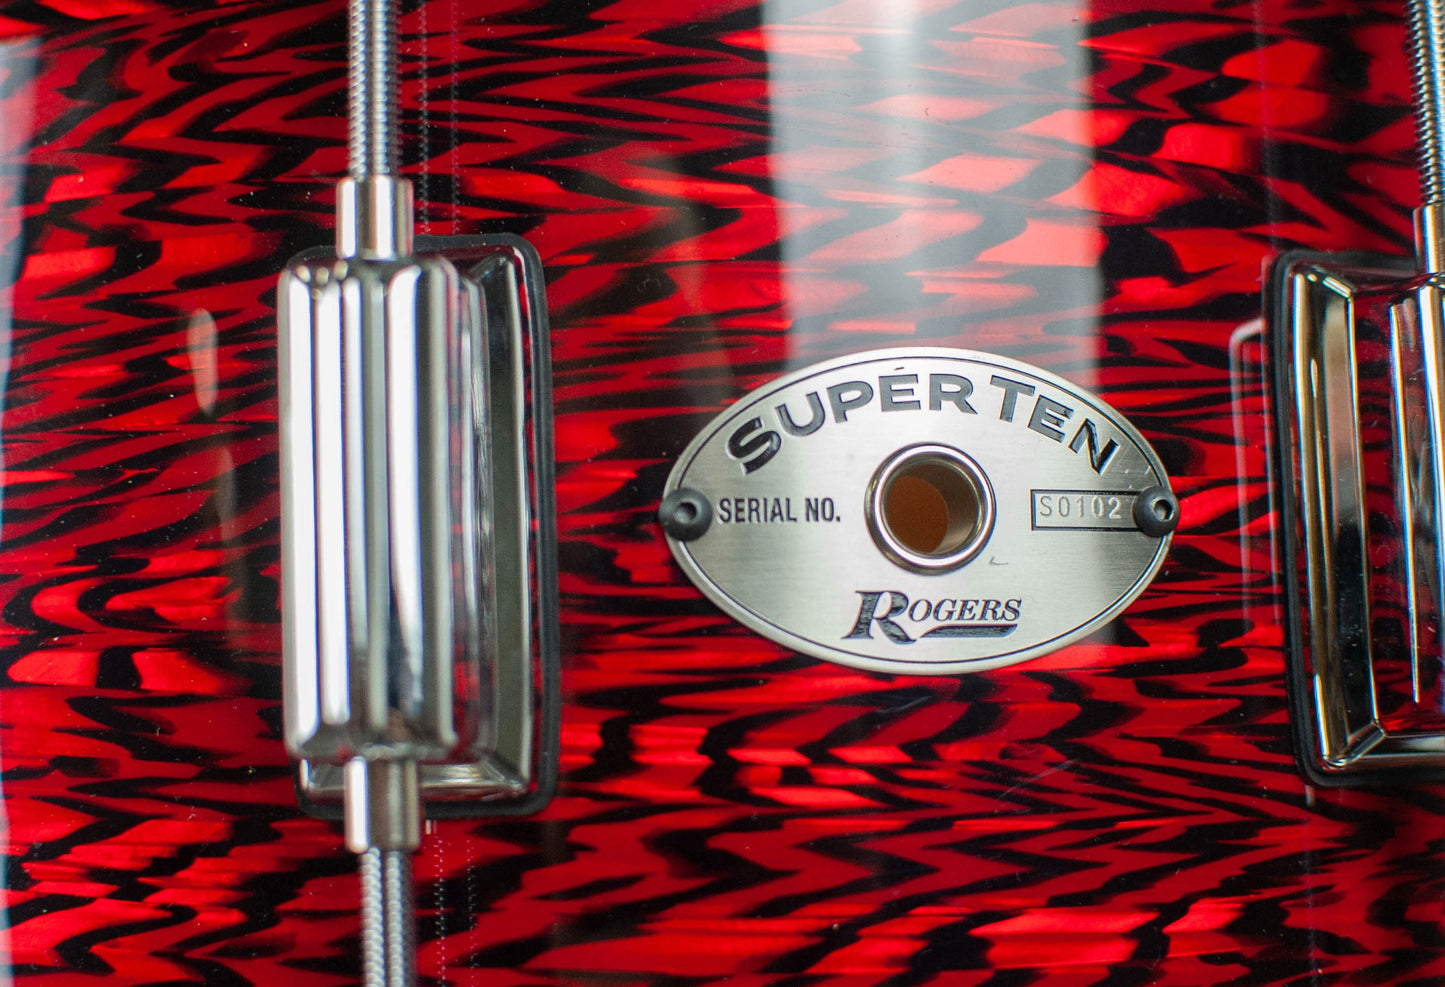 Rogers 6.5x14 SuperTen Wood Shell Snare Drum - Red Onyx